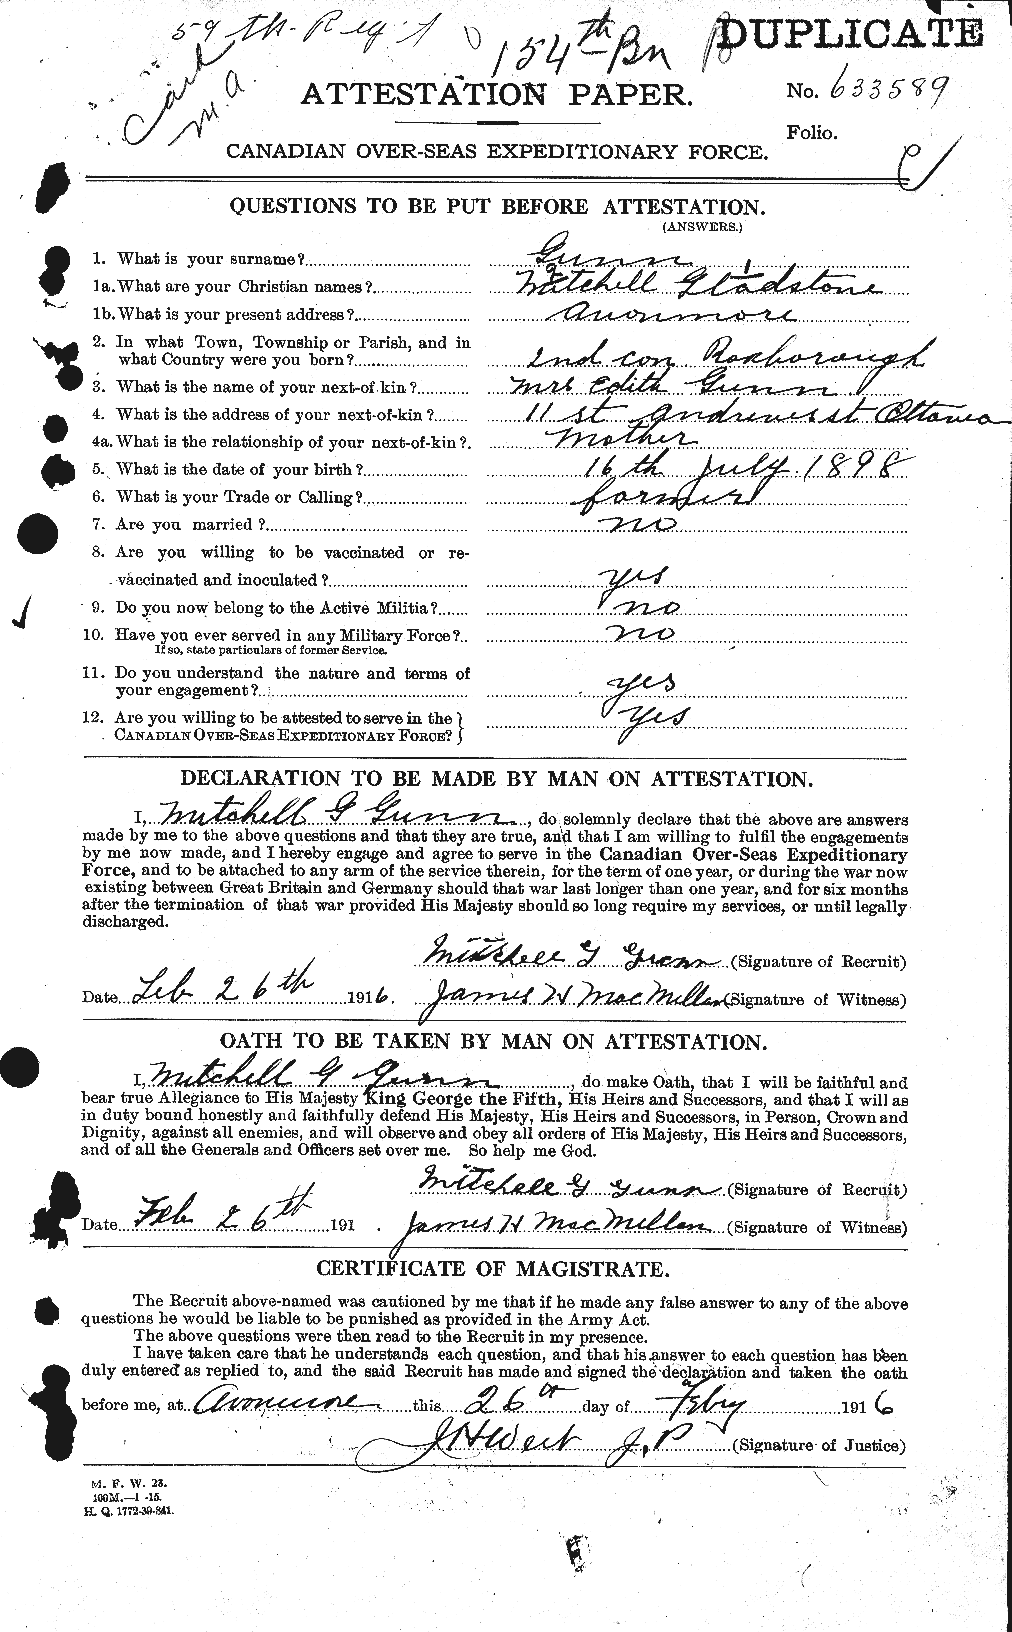 Personnel Records of the First World War - CEF 369247a